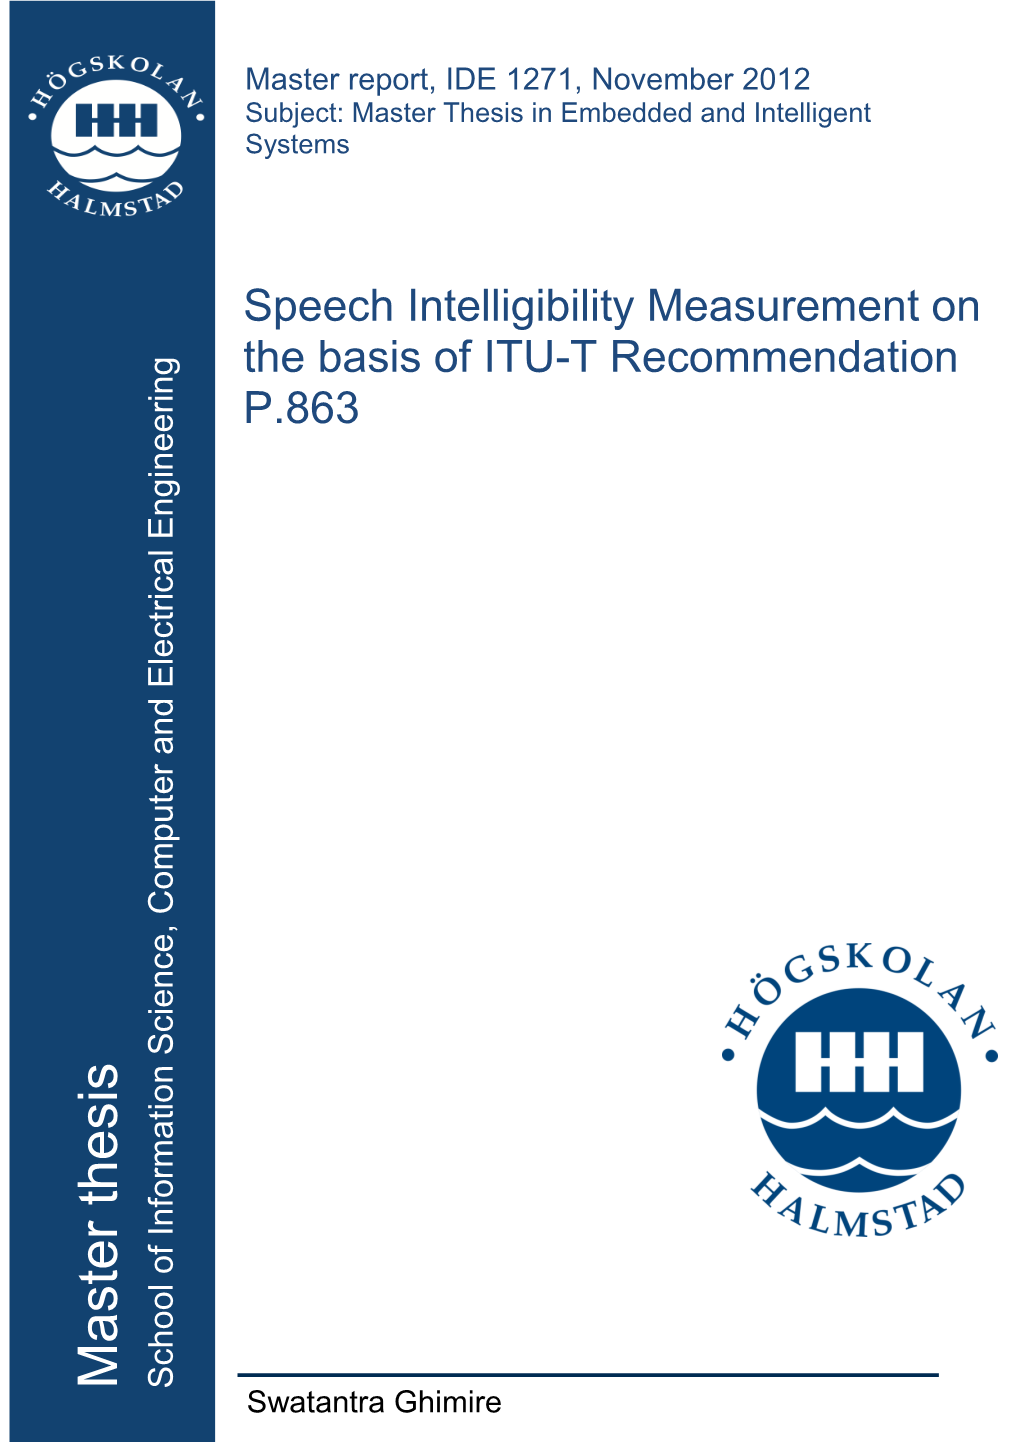 Speech Intelligibility Measurement on the Basis of ITU-T Recommendation P.863